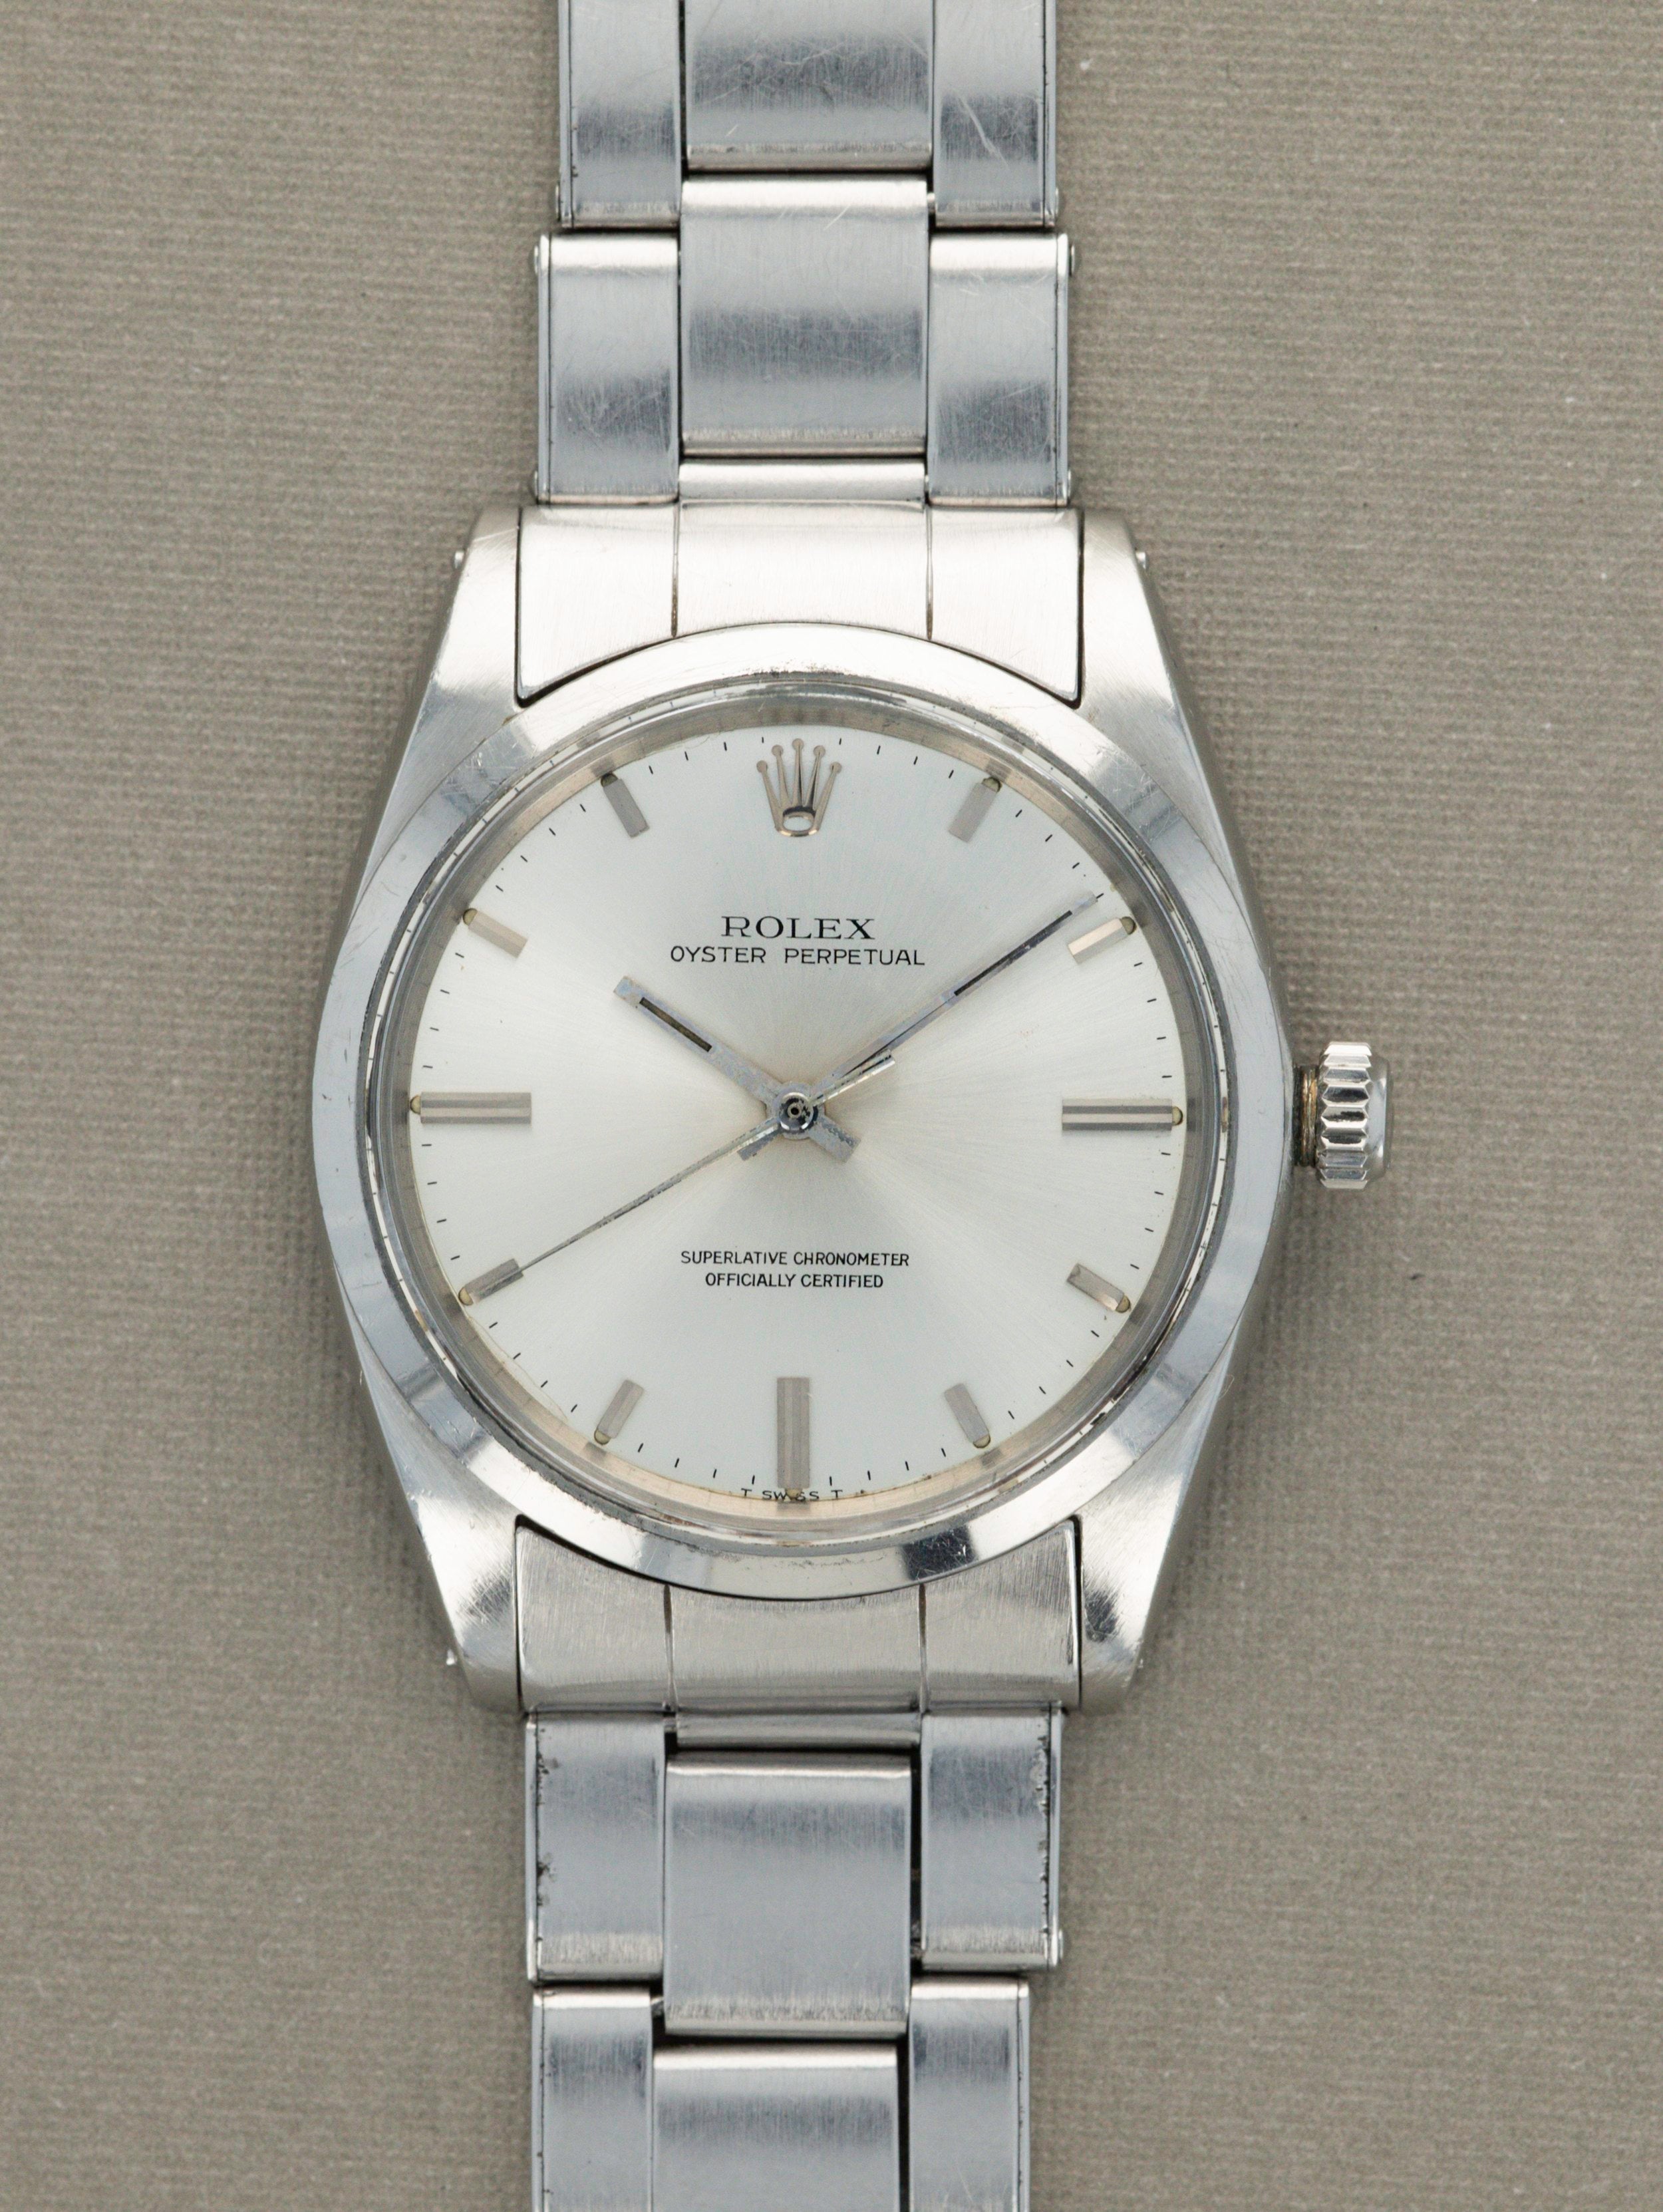 Rolex Oyster Perpetual Ref 1018 - 36mm Case